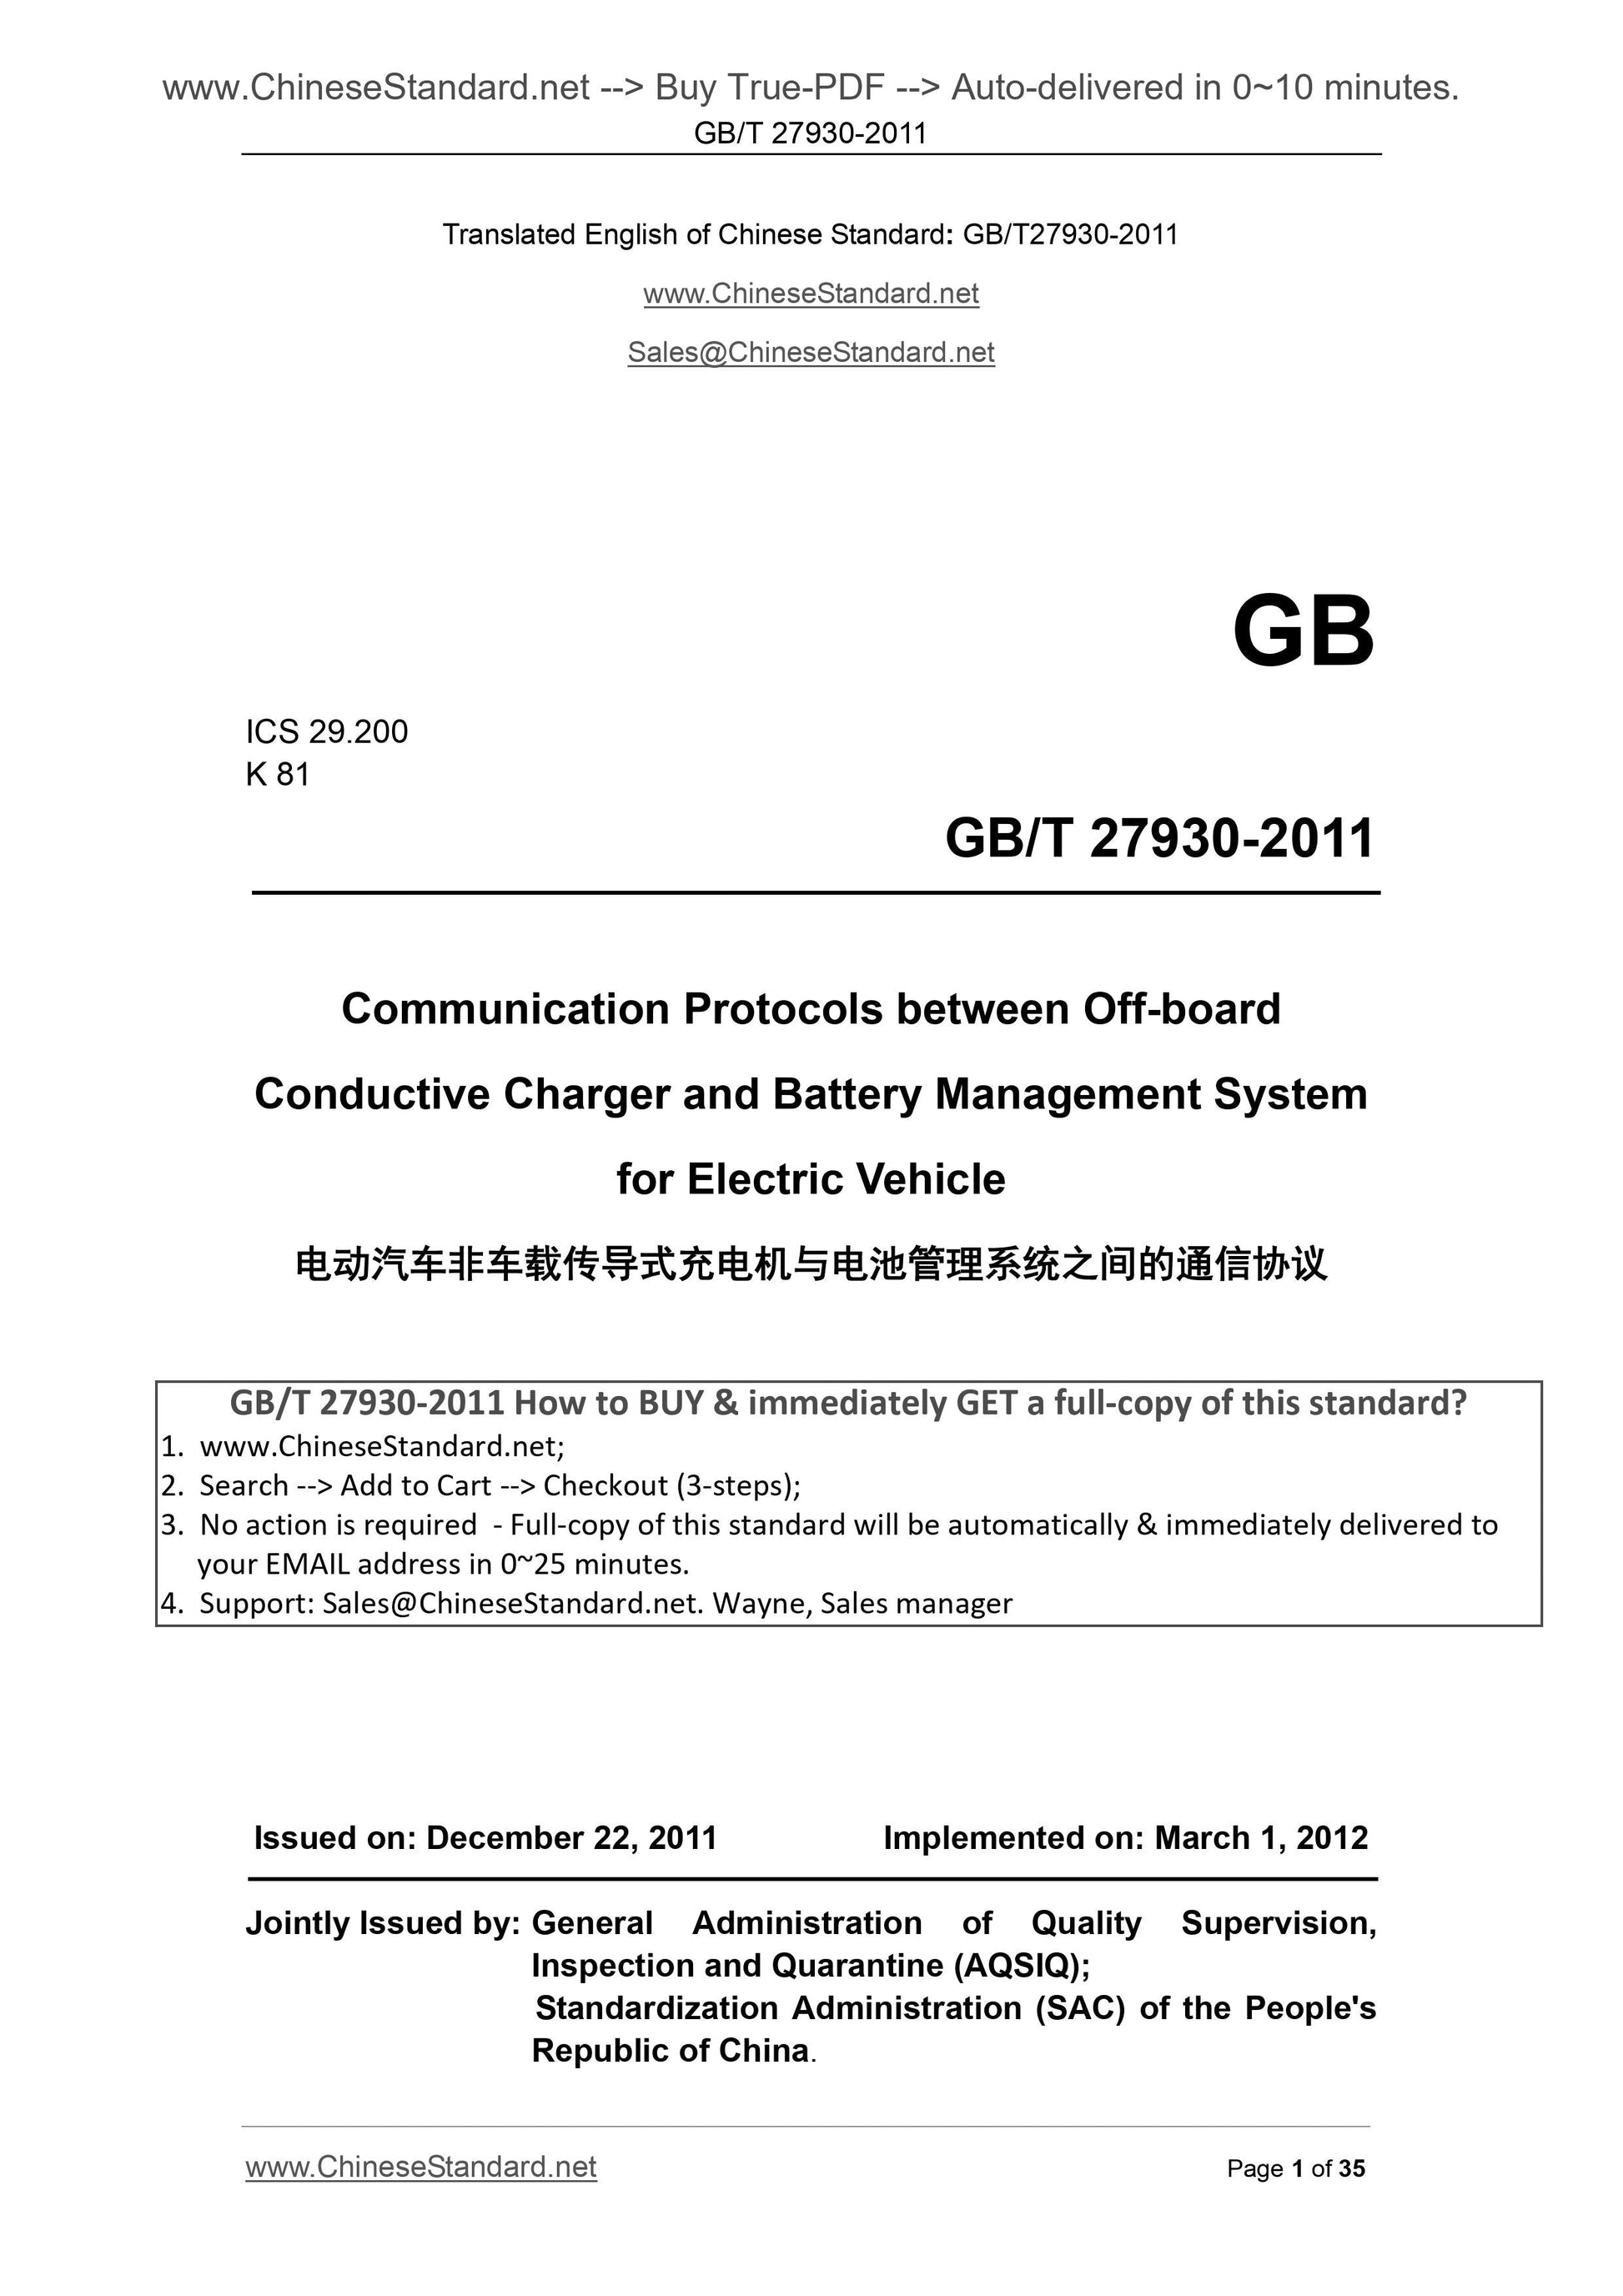 GB/T 27930-2011 Page 1